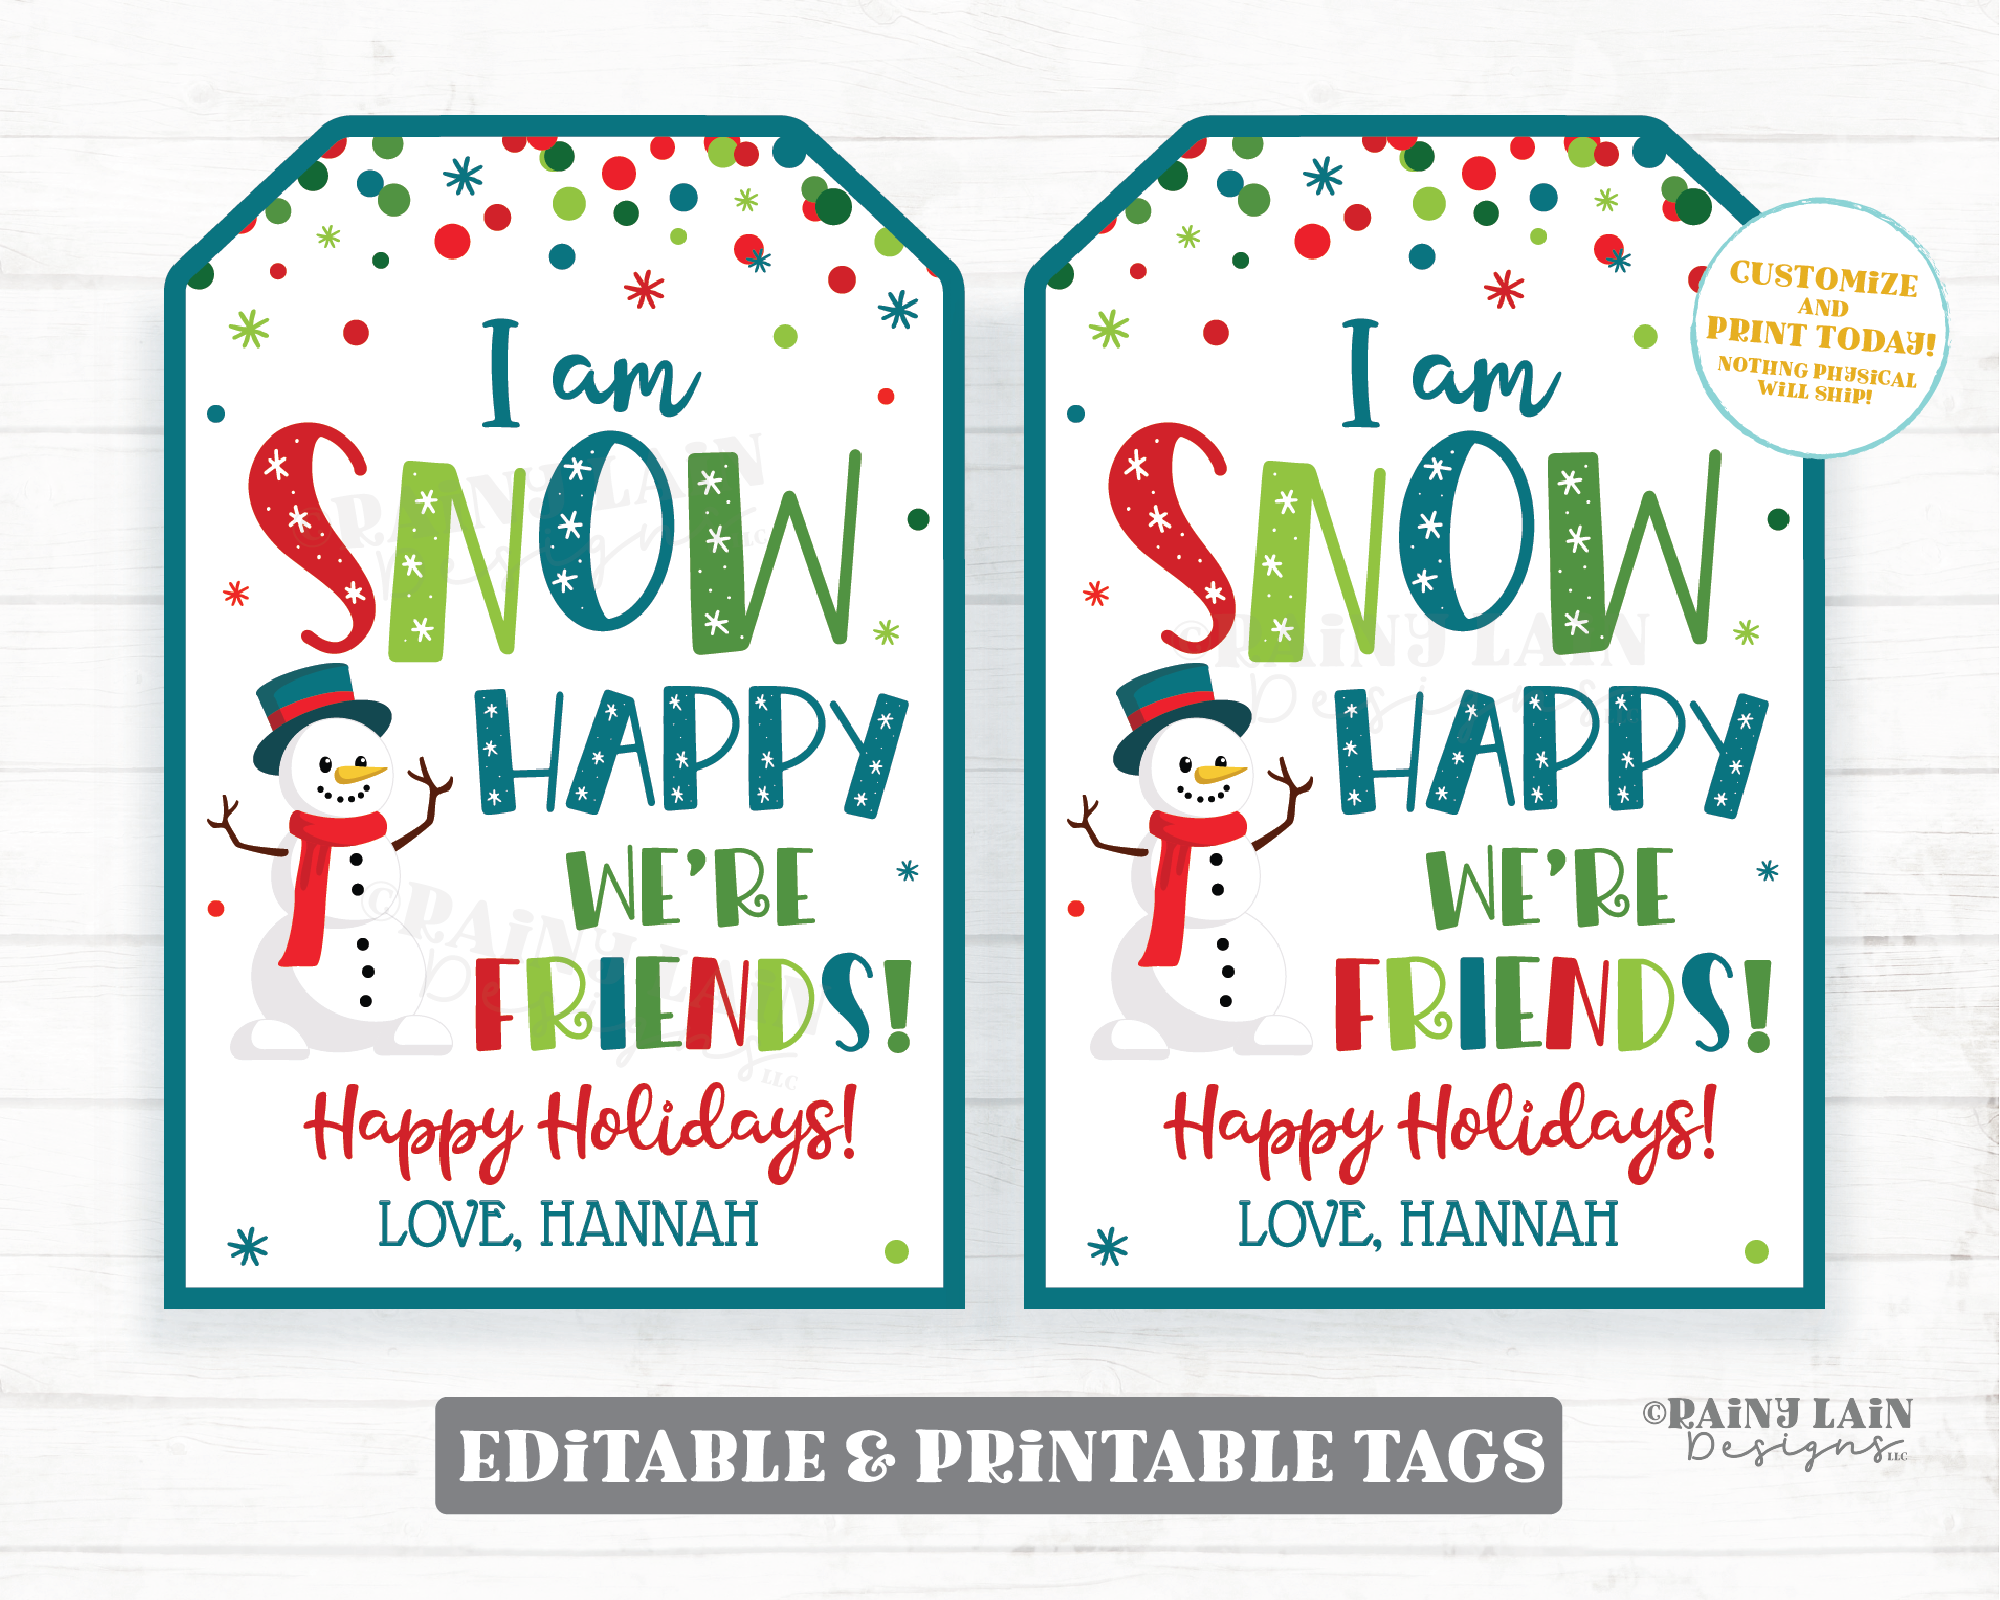 I am SNOW glad we're friends Tag Happy we are friends Printable Winter Christmas Editable Holiday Favor Snowman Student Classroom Gift Tag